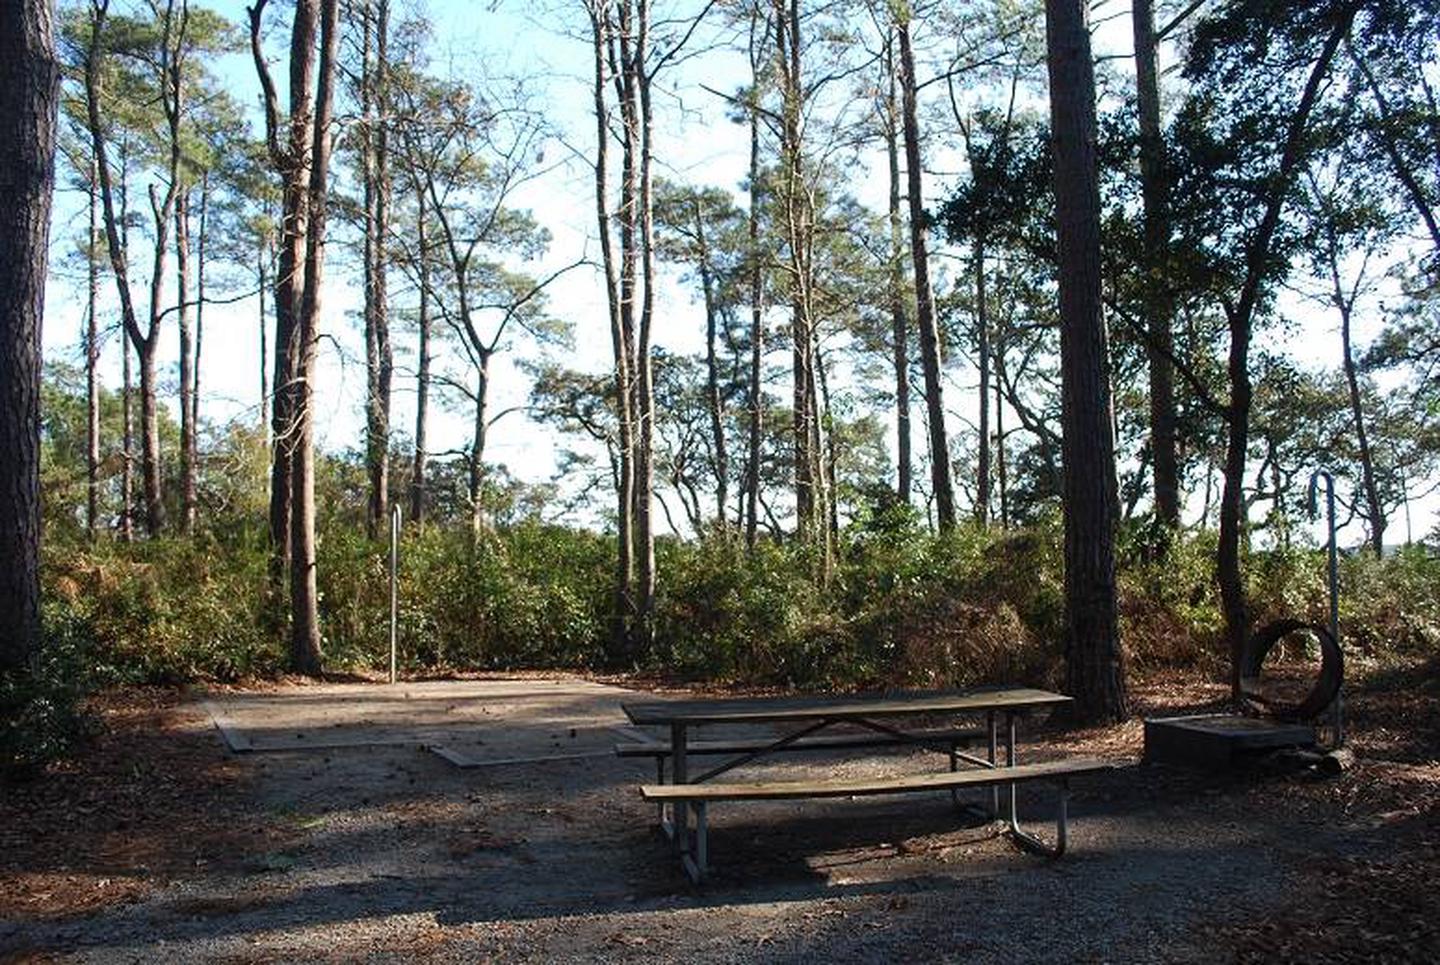 Oyster Point Campsite #9Basic Campsite - Tent Pad, Picnic Table, Fire Ring, Lantern Post